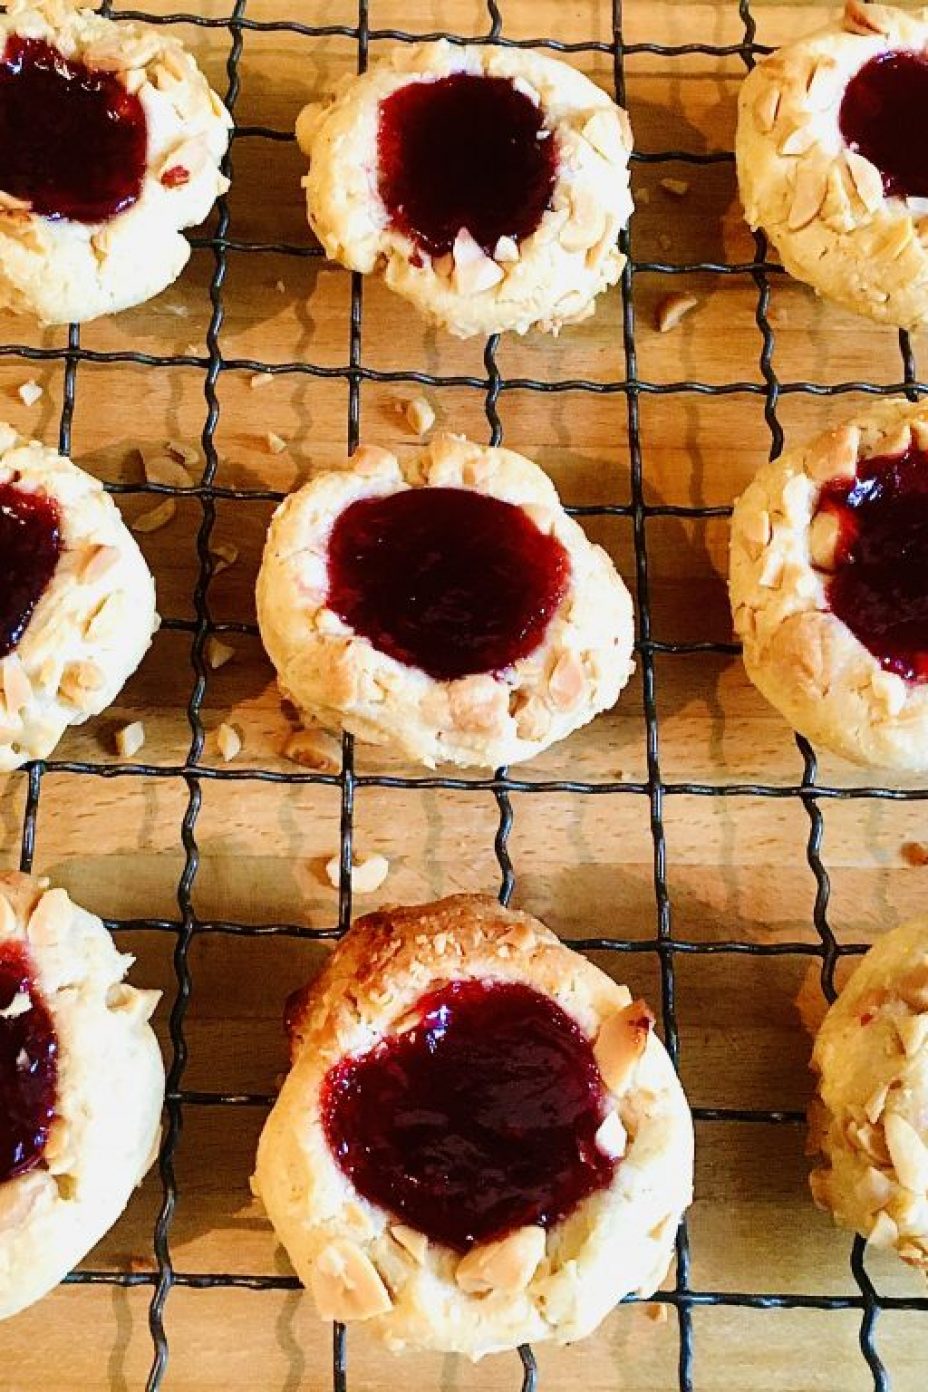 Rows of peanut butter and raspberry jam thumbprint cookies on a wire rack